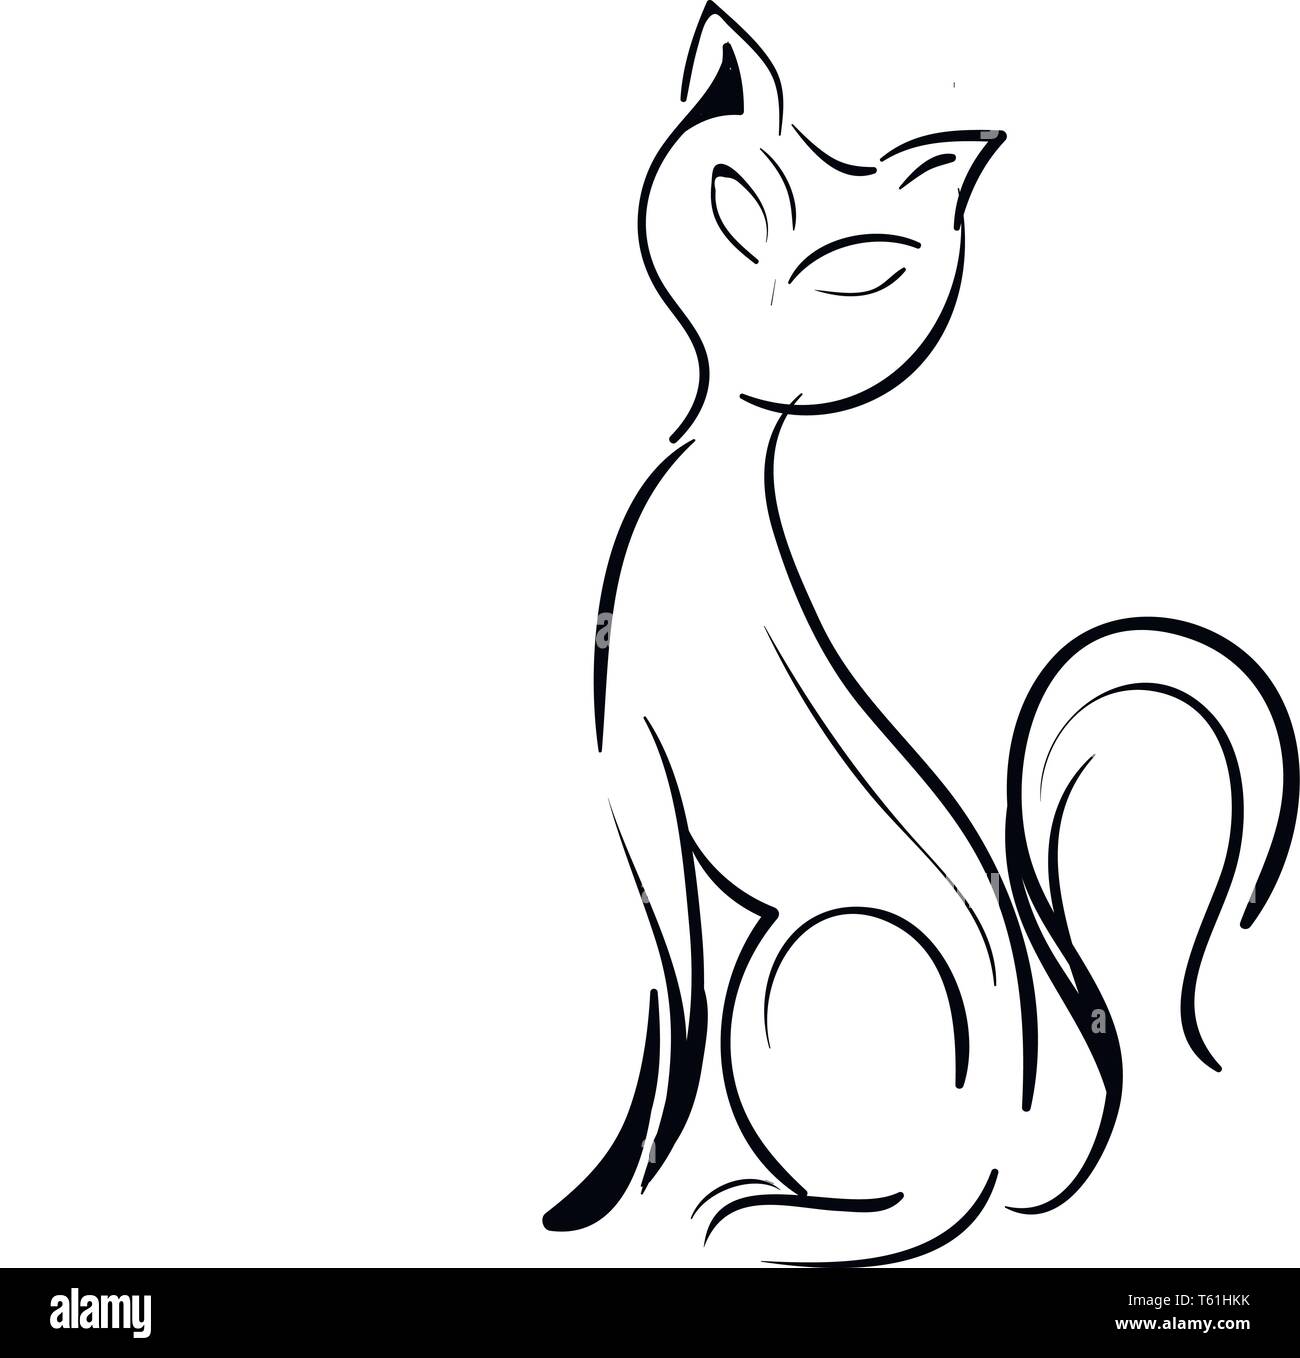 A black and white silhouette of a cat sitting upright and turned toward one side vector color drawing or illustration Stock Vector